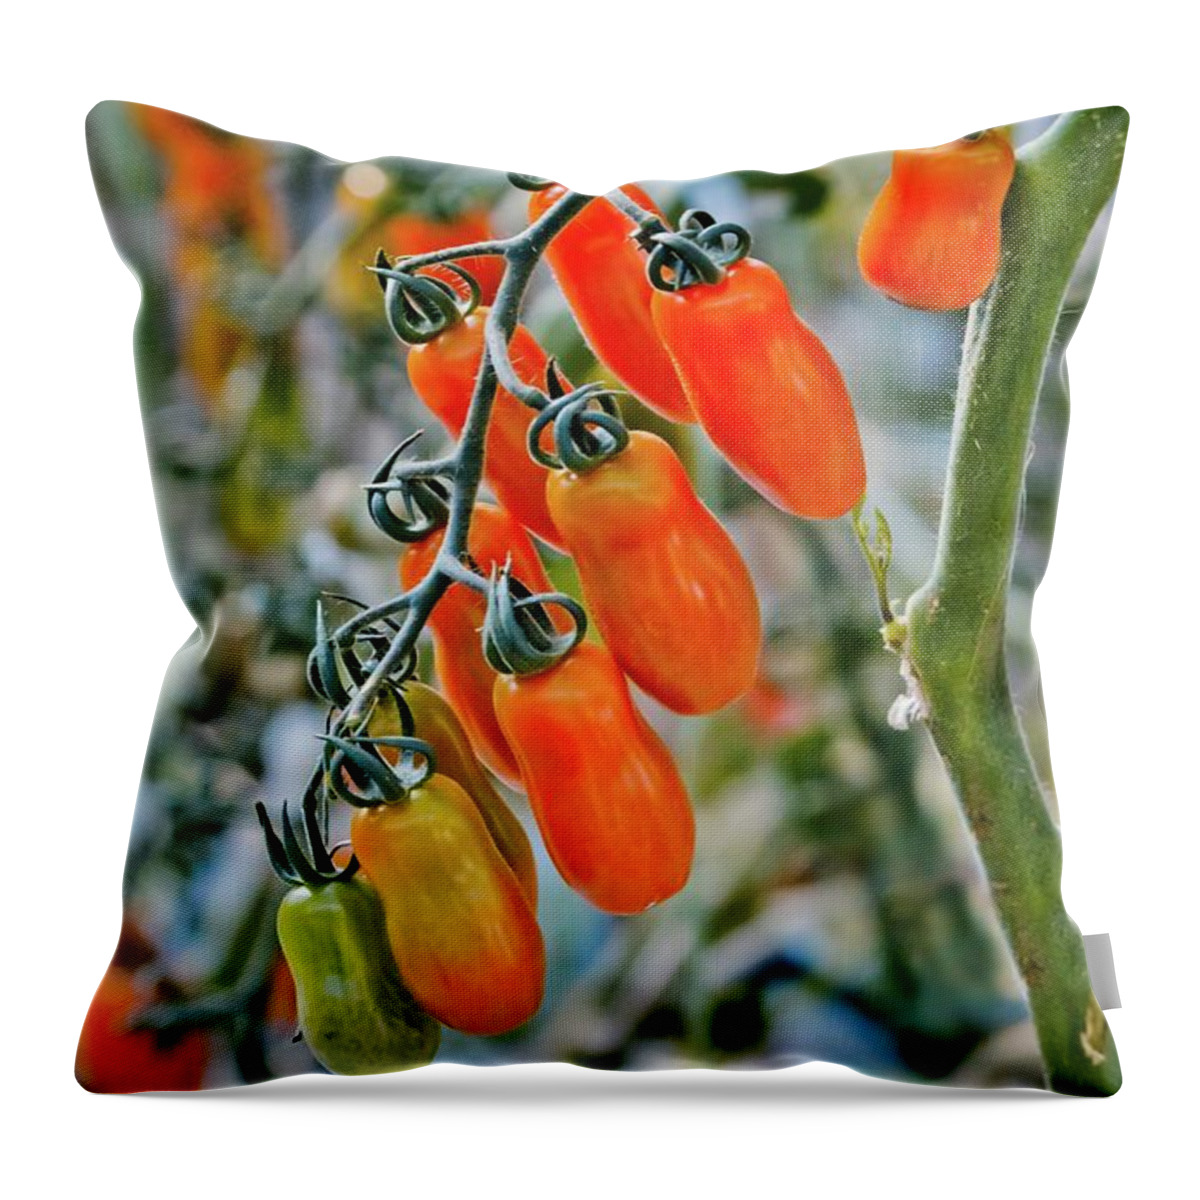 Tomatoes Throw Pillow featuring the photograph Cascading Color by Linda Unger